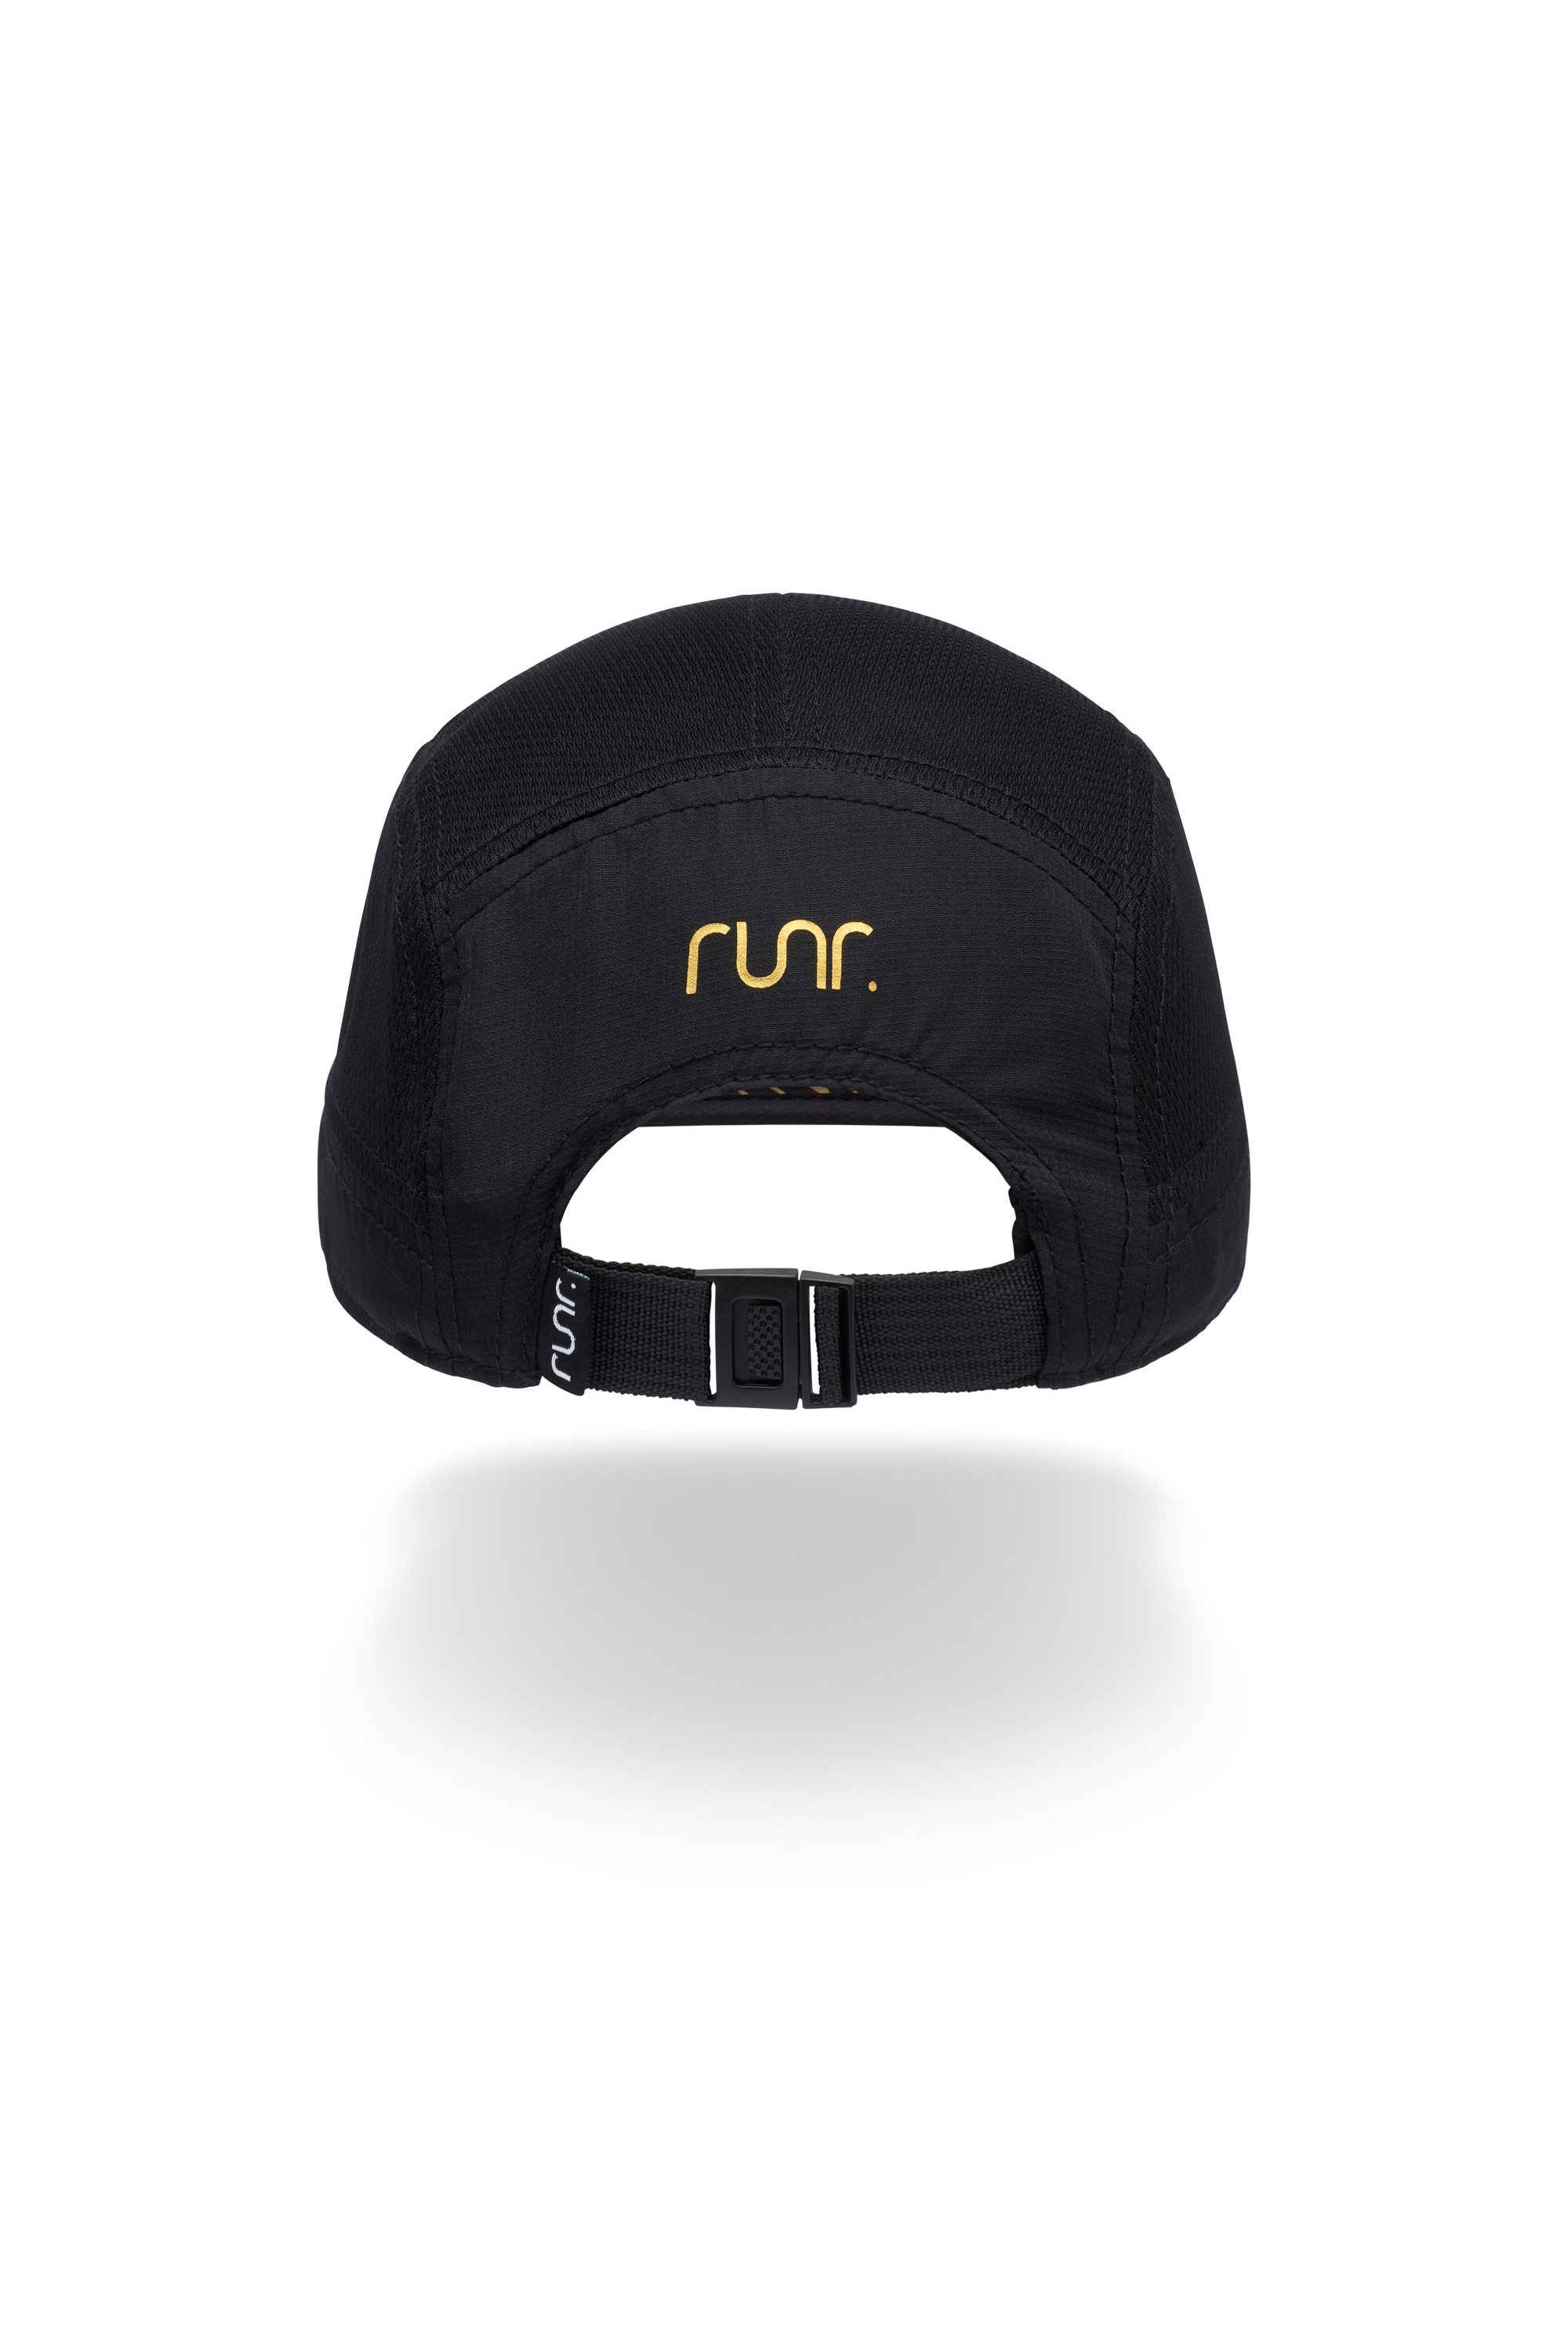 Runr Athens Technical Running Hat